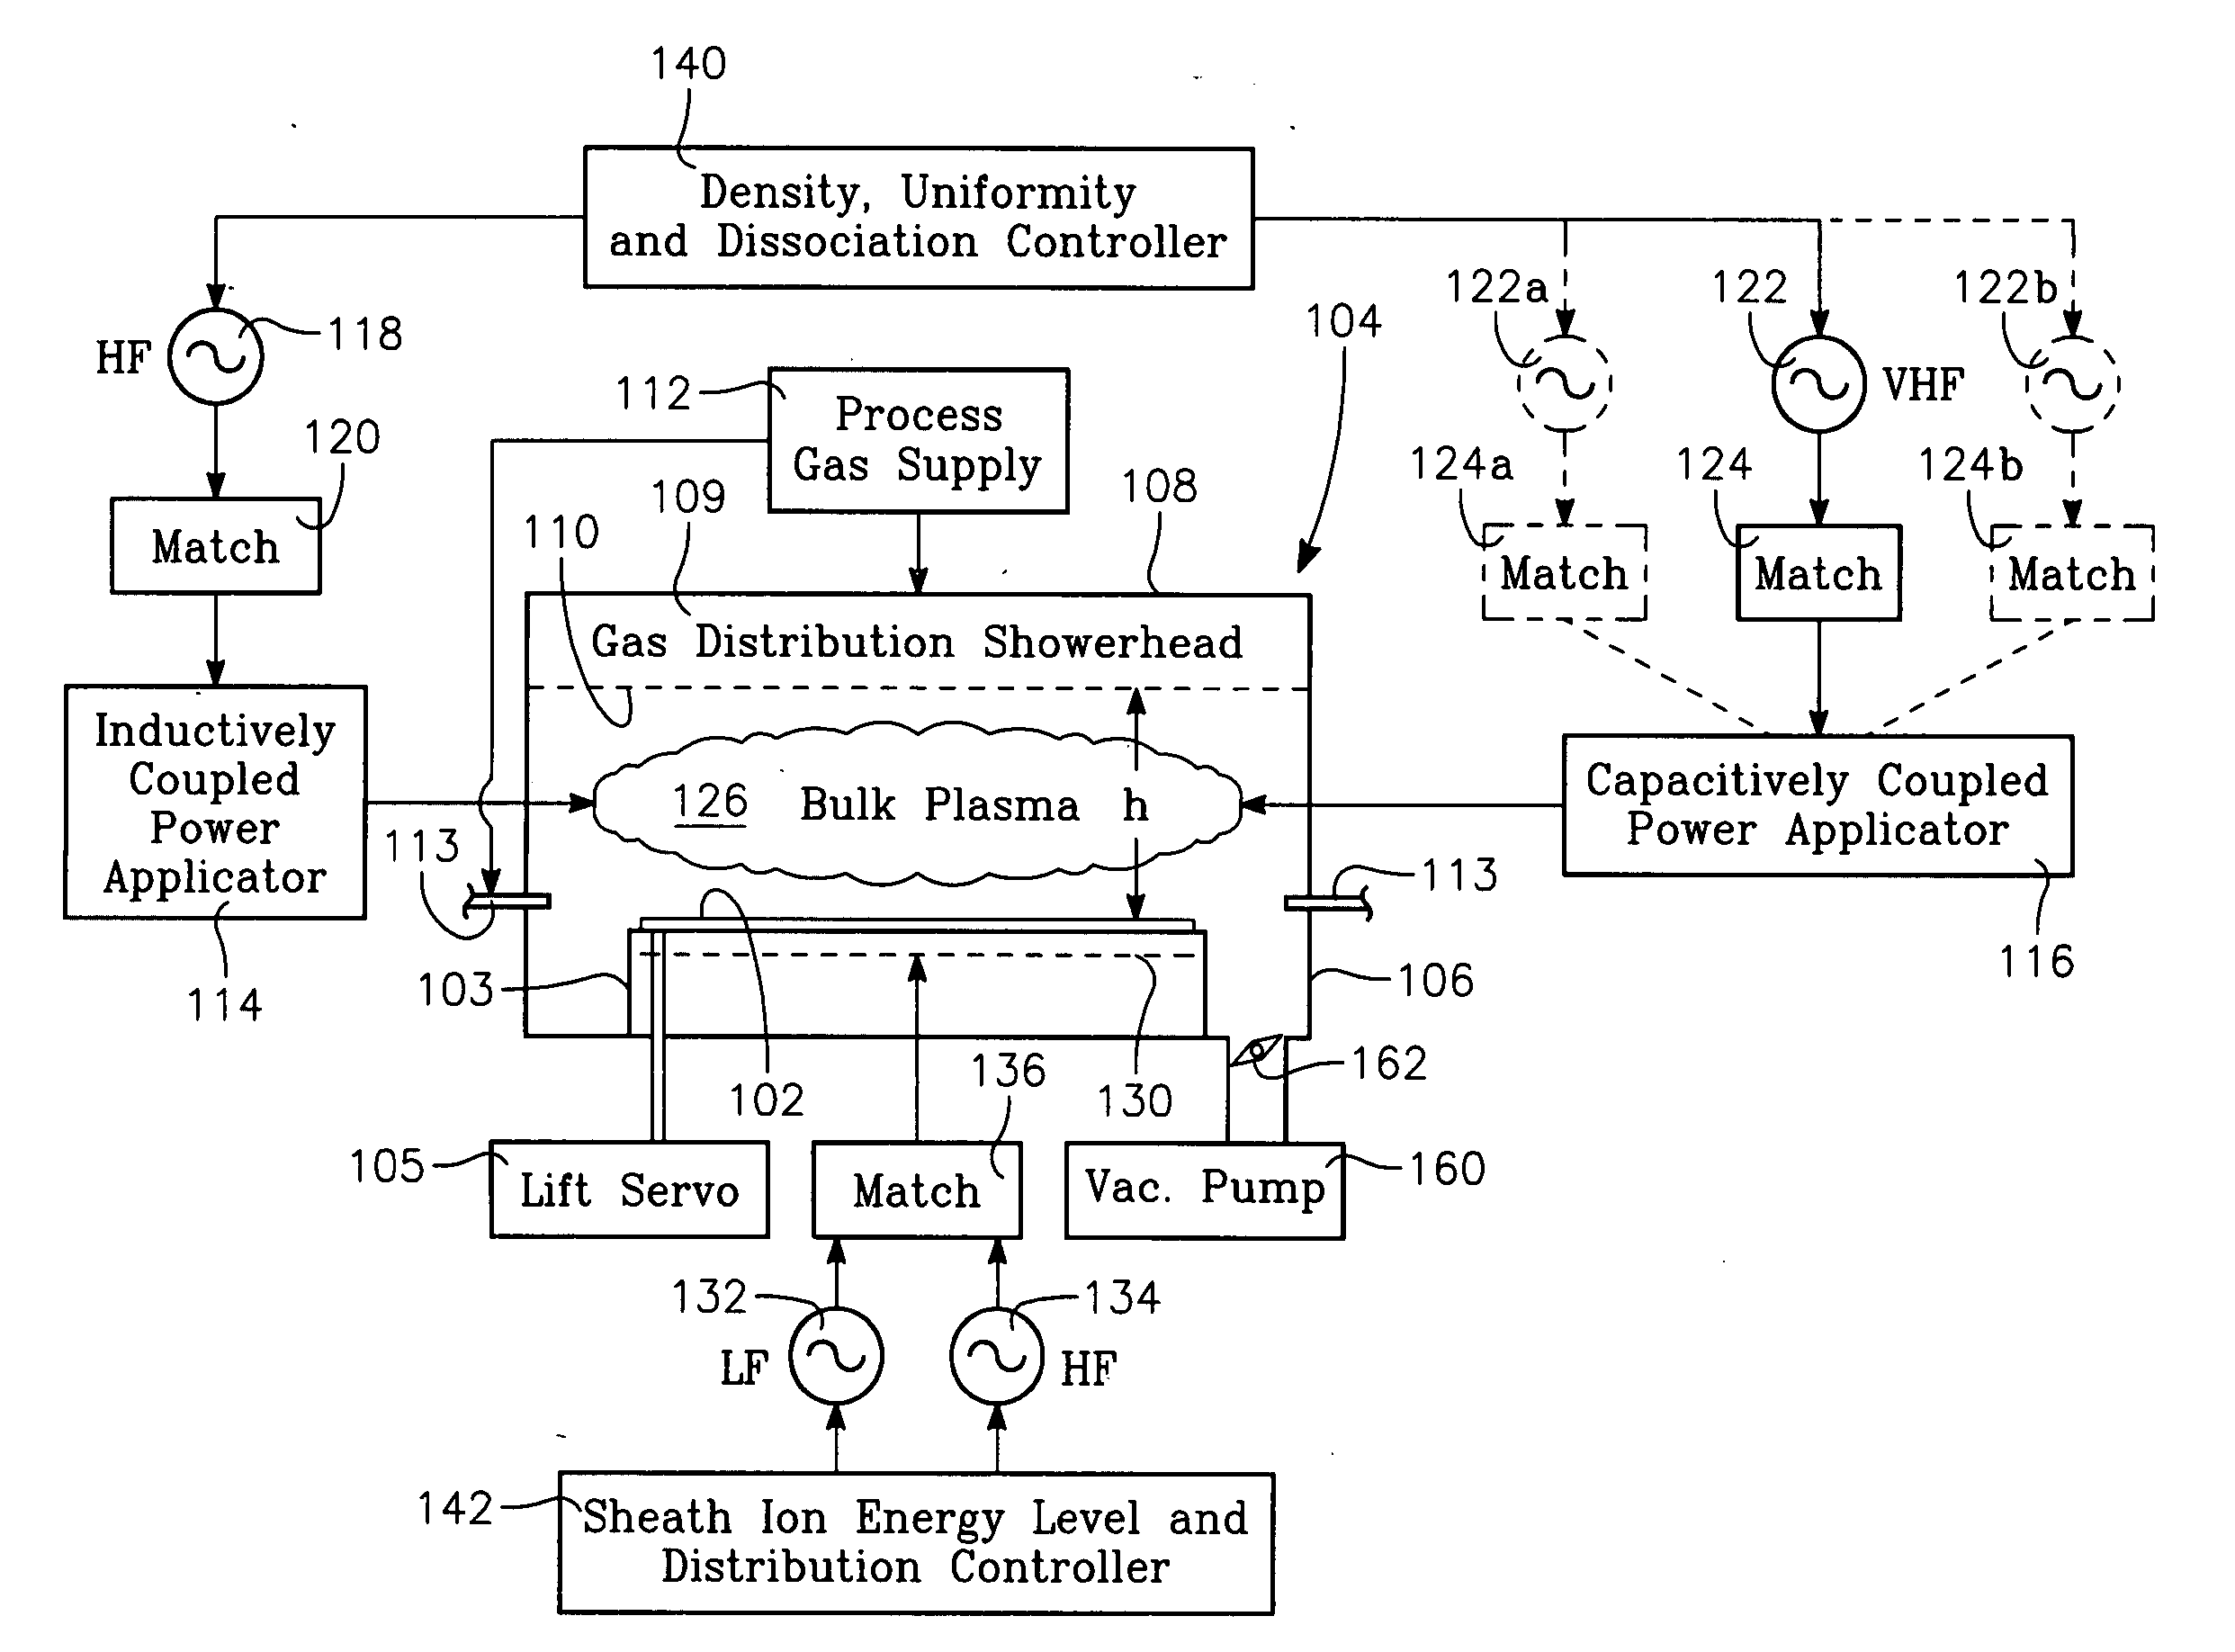 Plasma reactor apparatus with an inductive plasma source and a VHF capacitively coupled plasma source with variable frequency